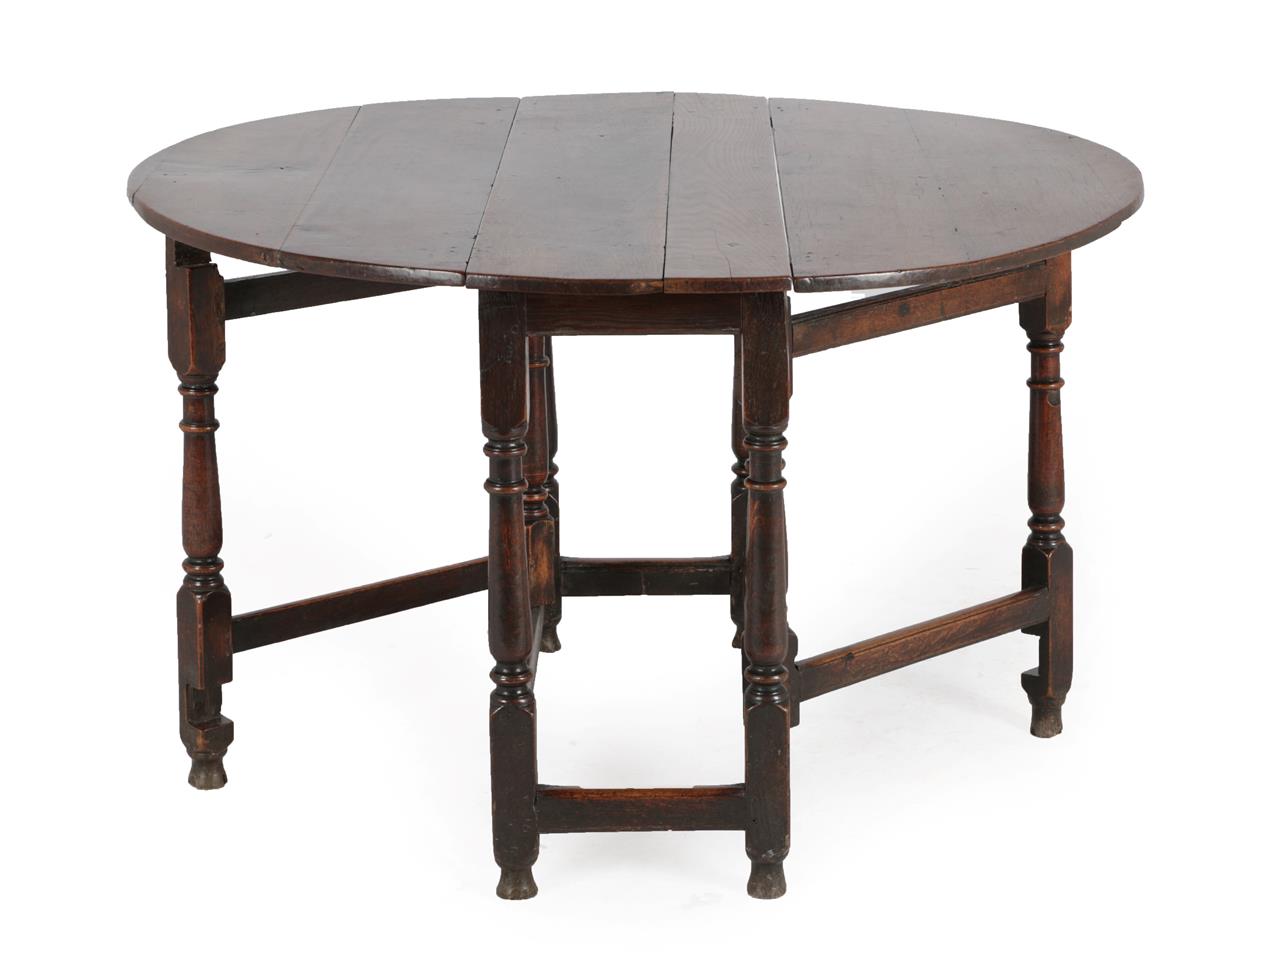 Lot 587 - An Early 18th Century Oak Six-Seater Gateleg Table, with two drop leaves to form an oval, on...